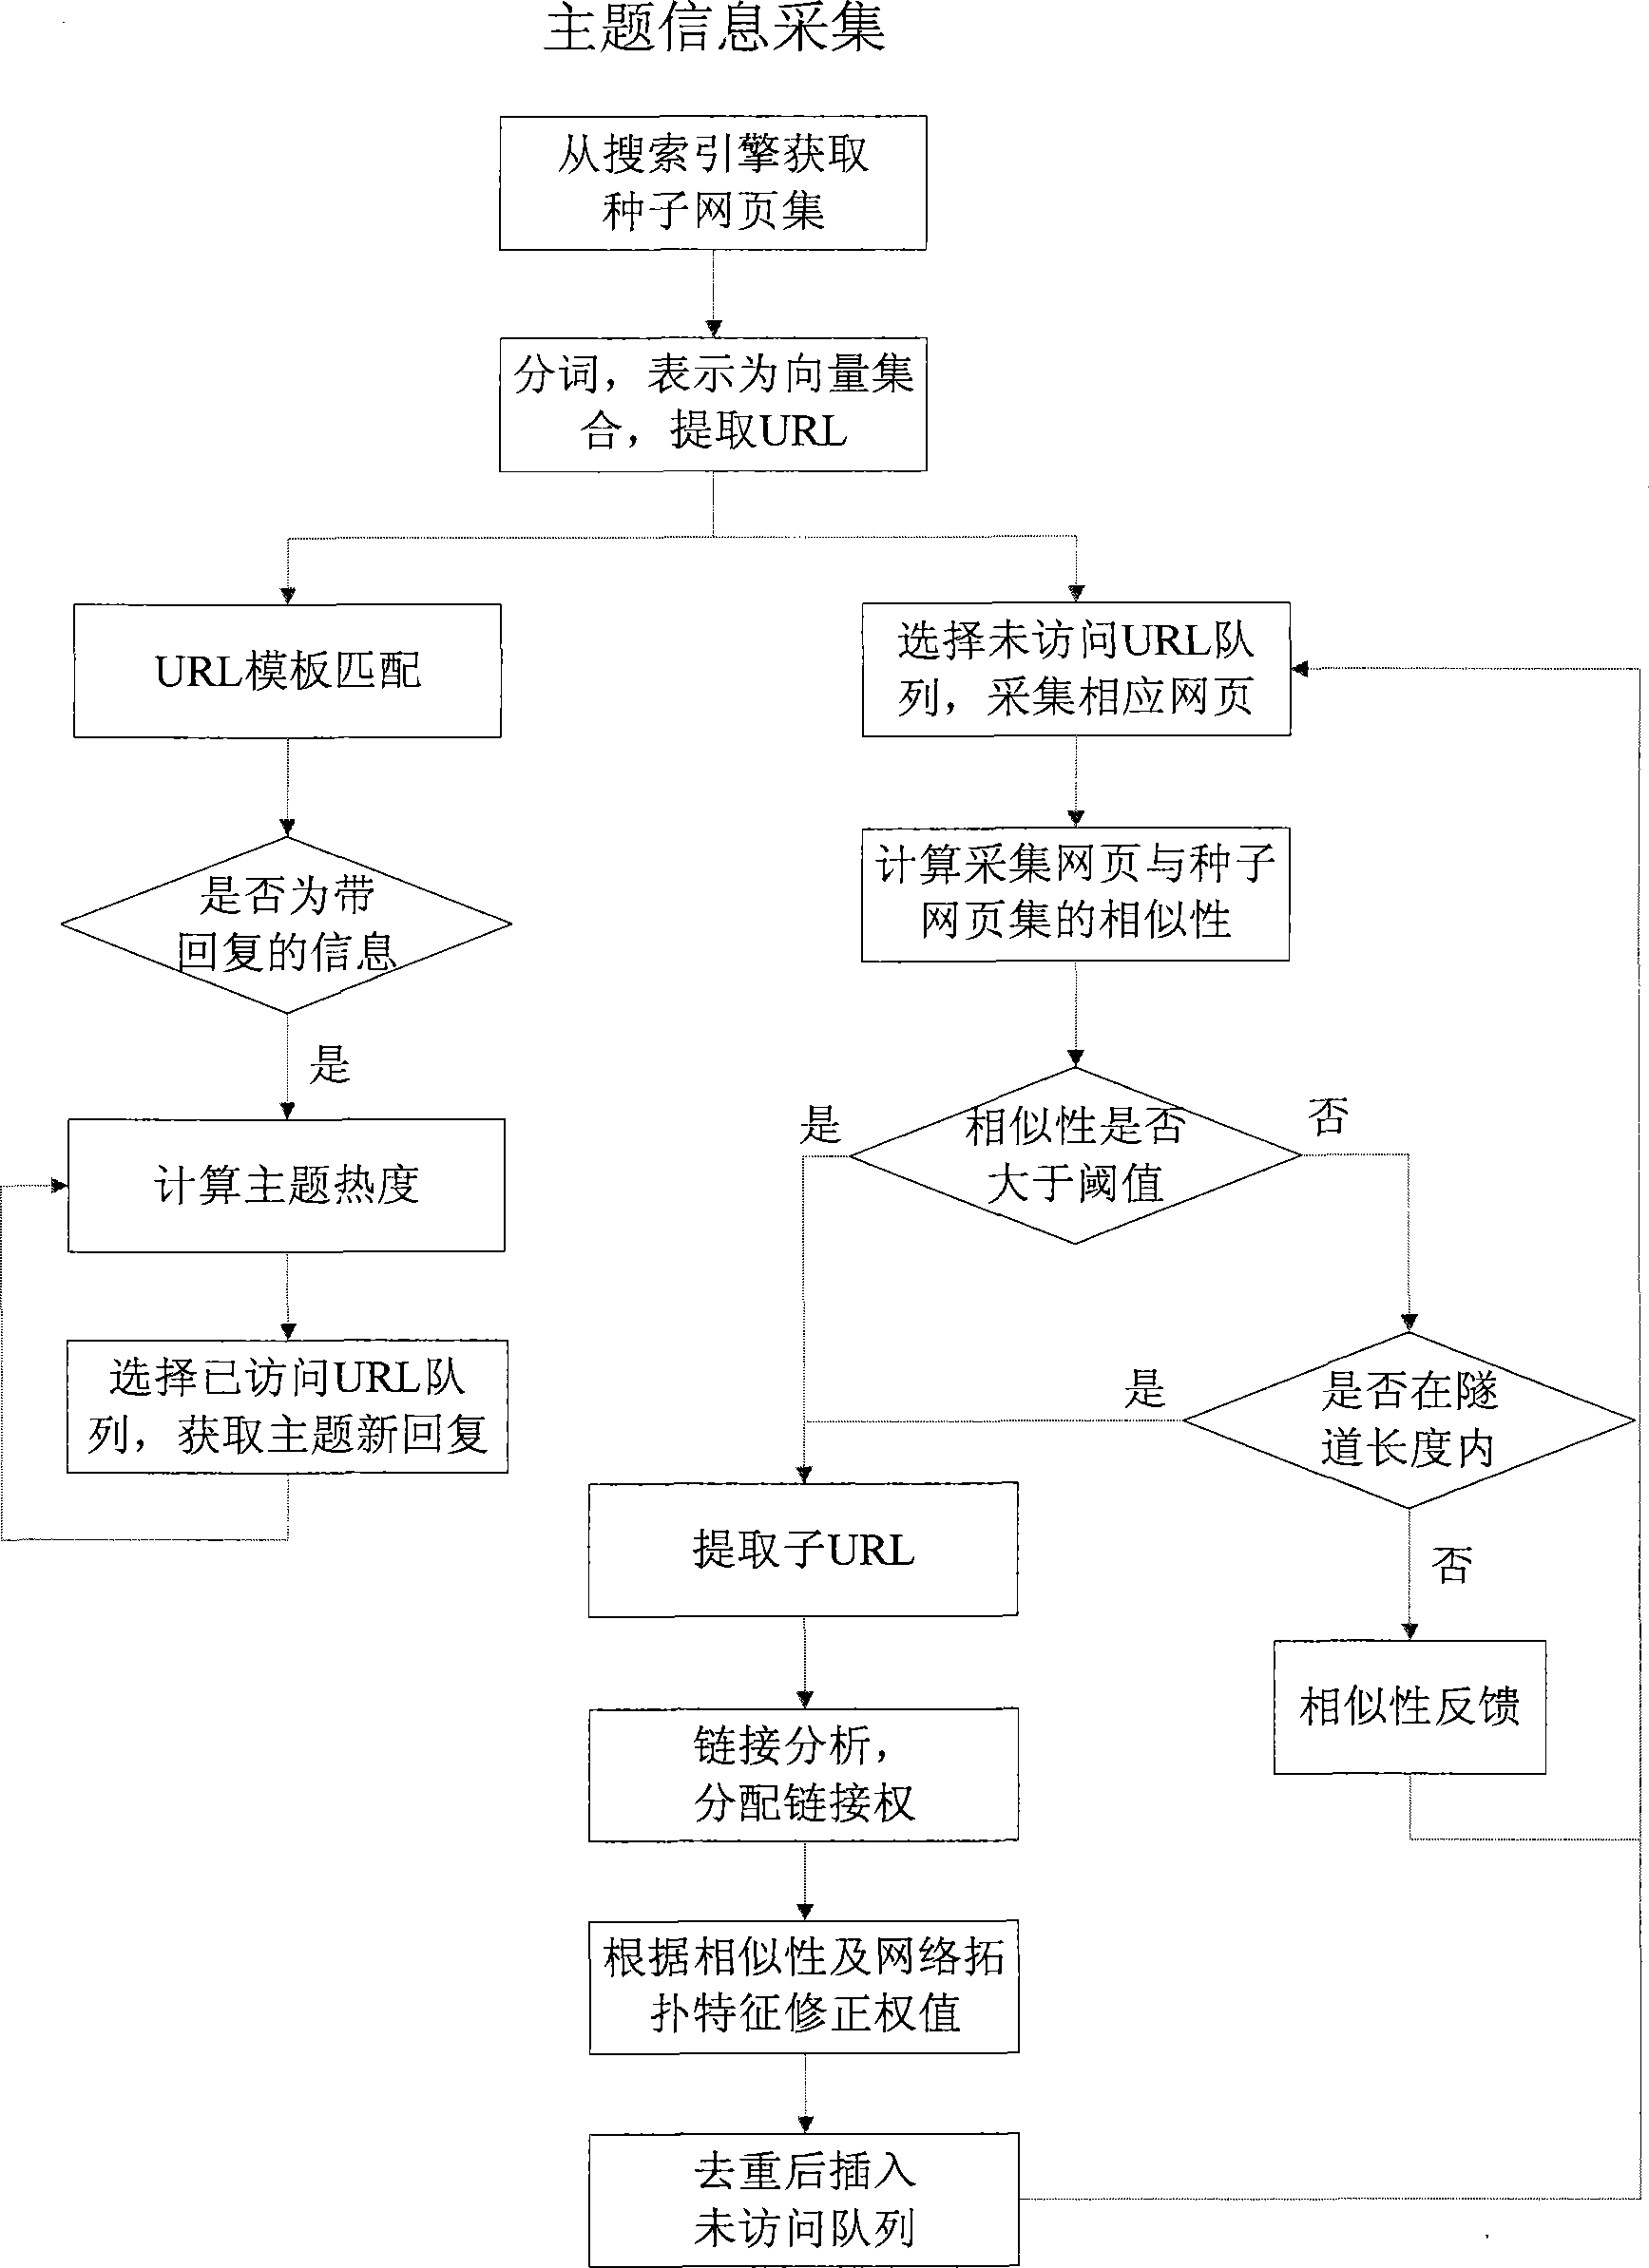 Topic information acquisition method based on network topology